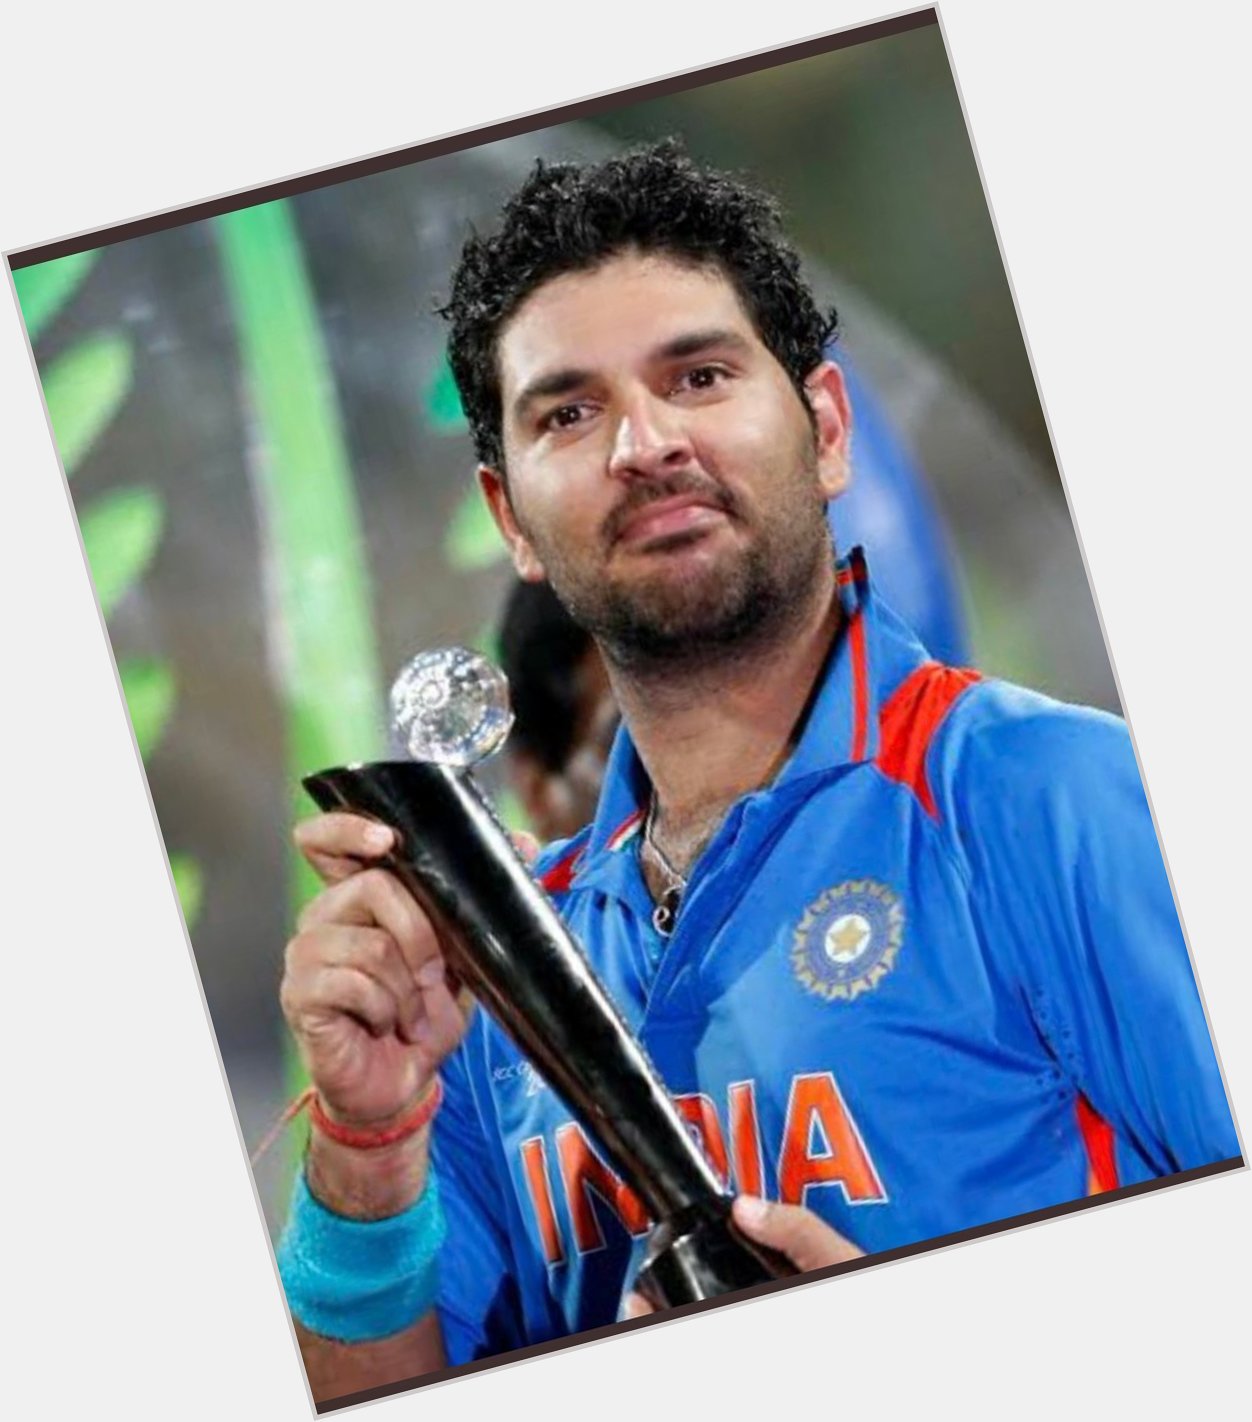 Happy Birthday the legend of Indian cricket team 
One and only Yuvraj Singh 